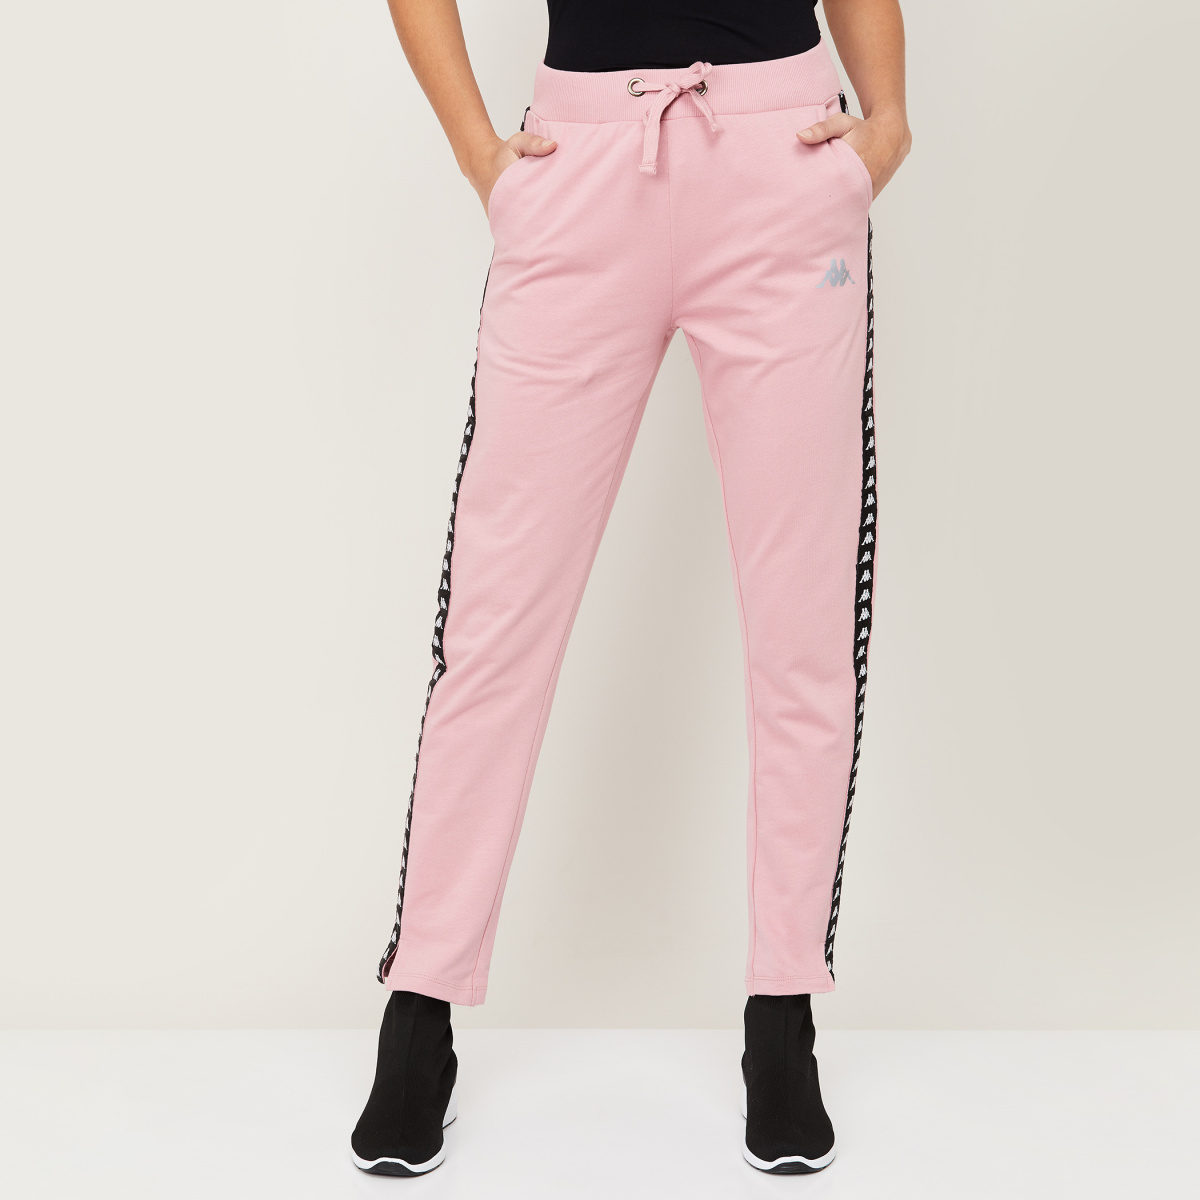 Buy kappa track pants for men in India @ Limeroad-cheohanoi.vn